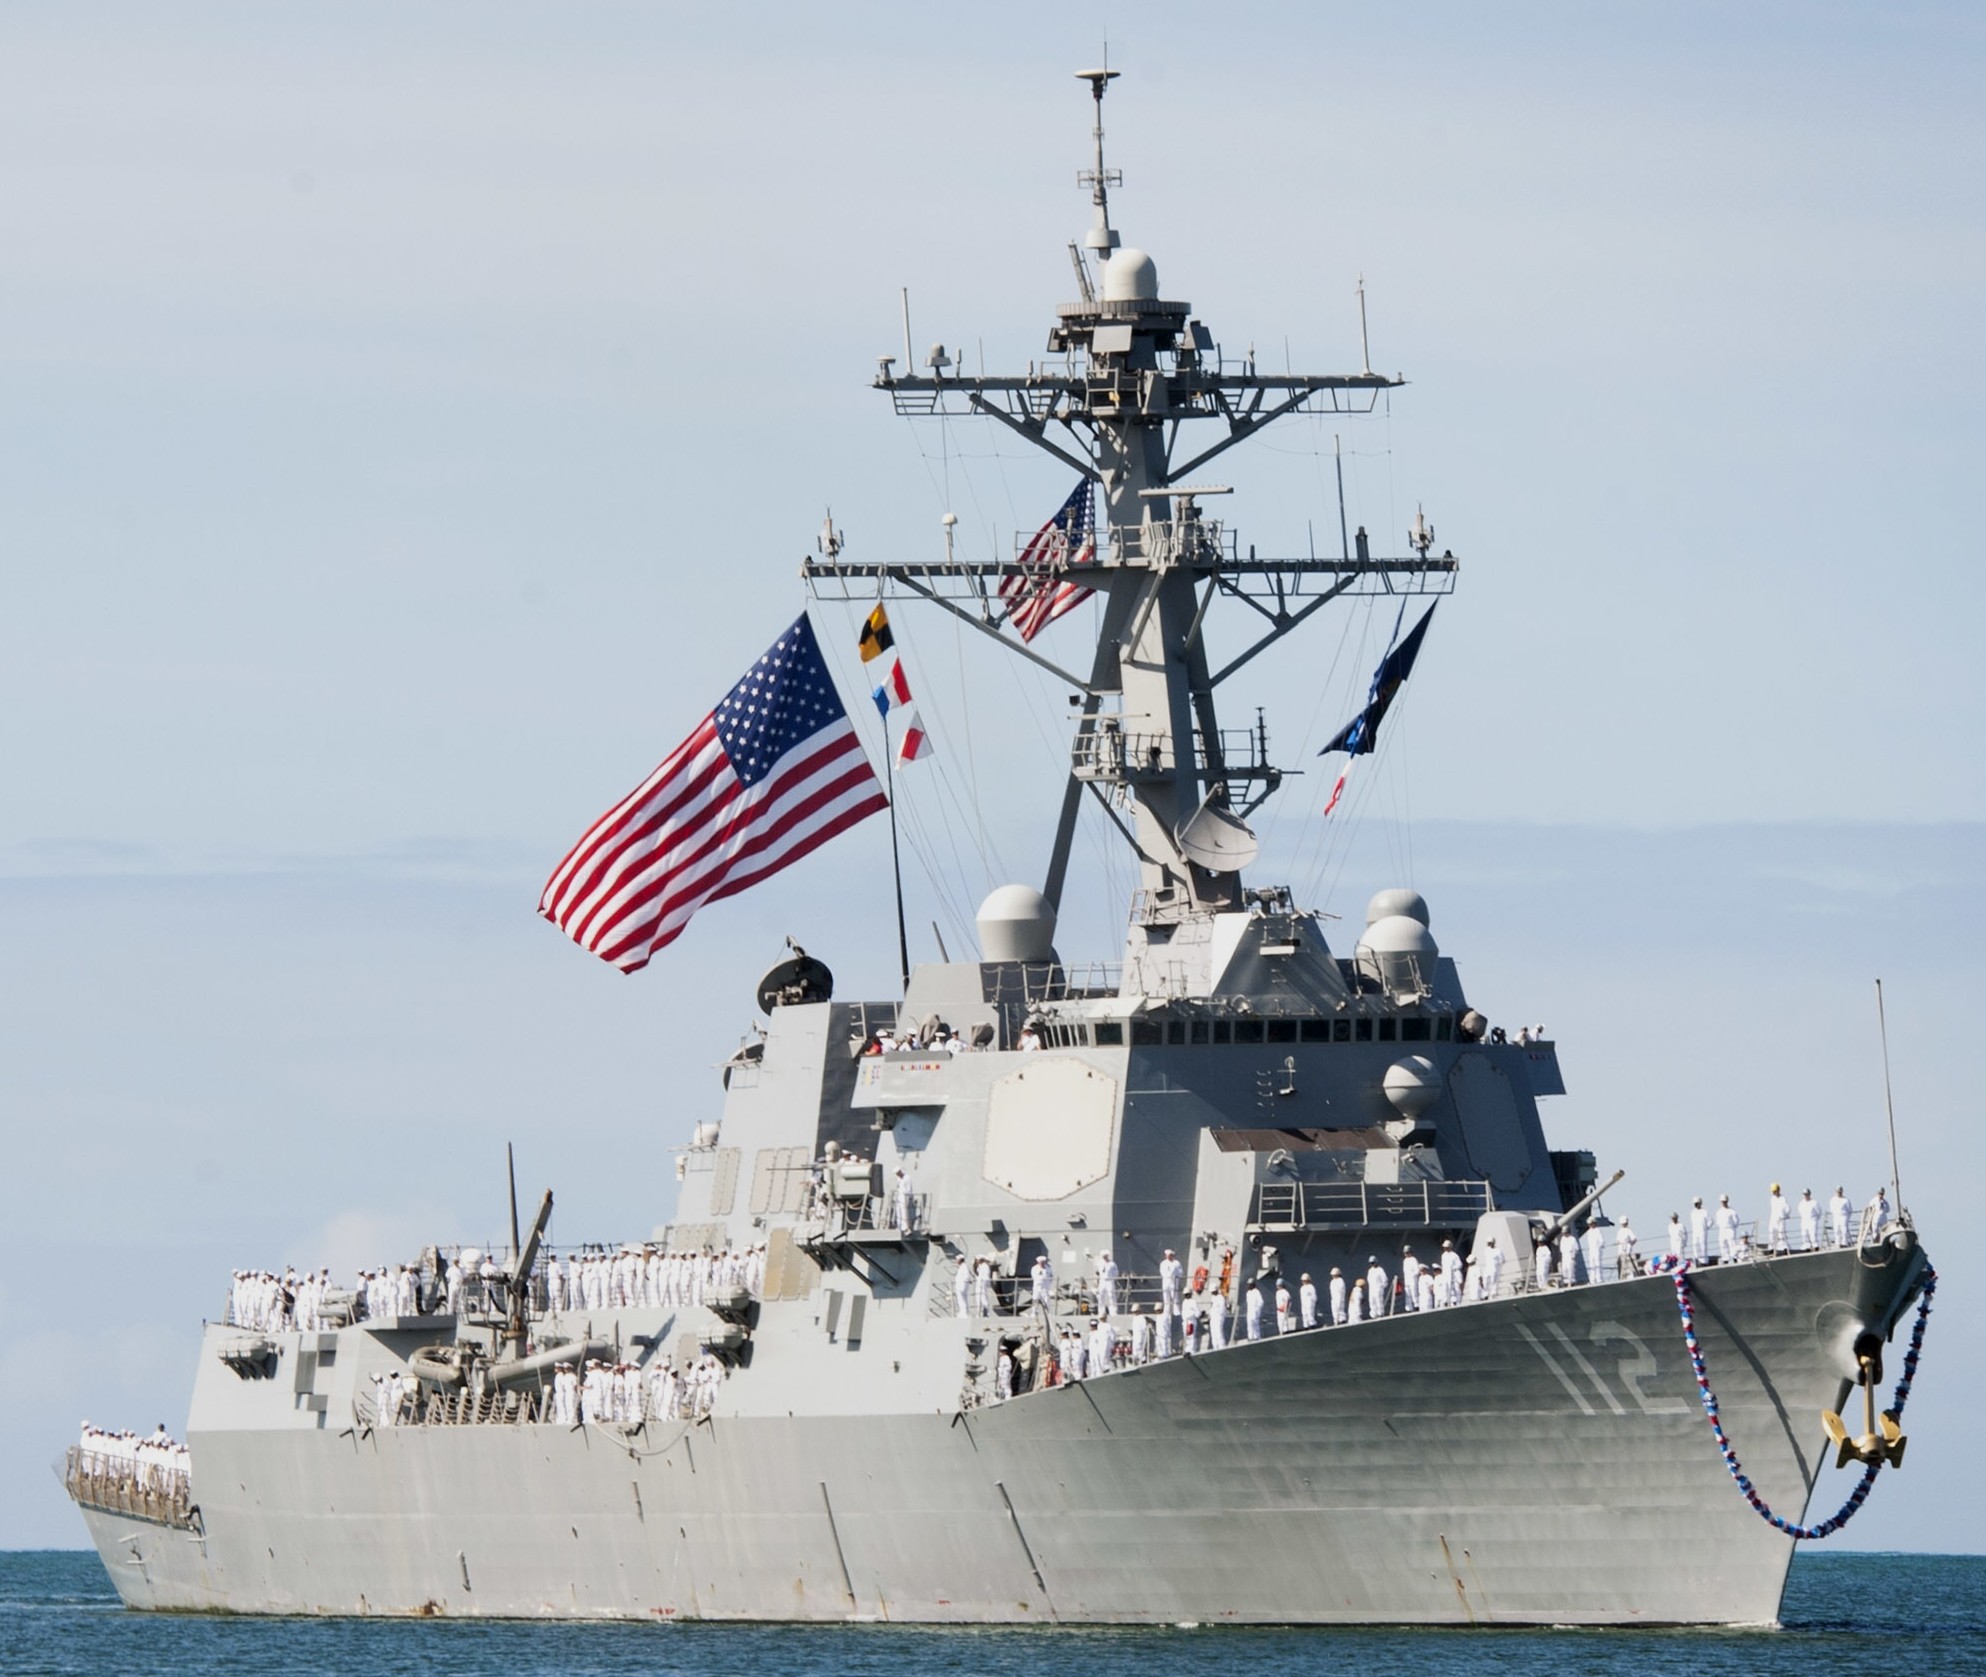 ddg-112 uss michael murphy arleigh burke class guided missile destroyer aegis us navy 26